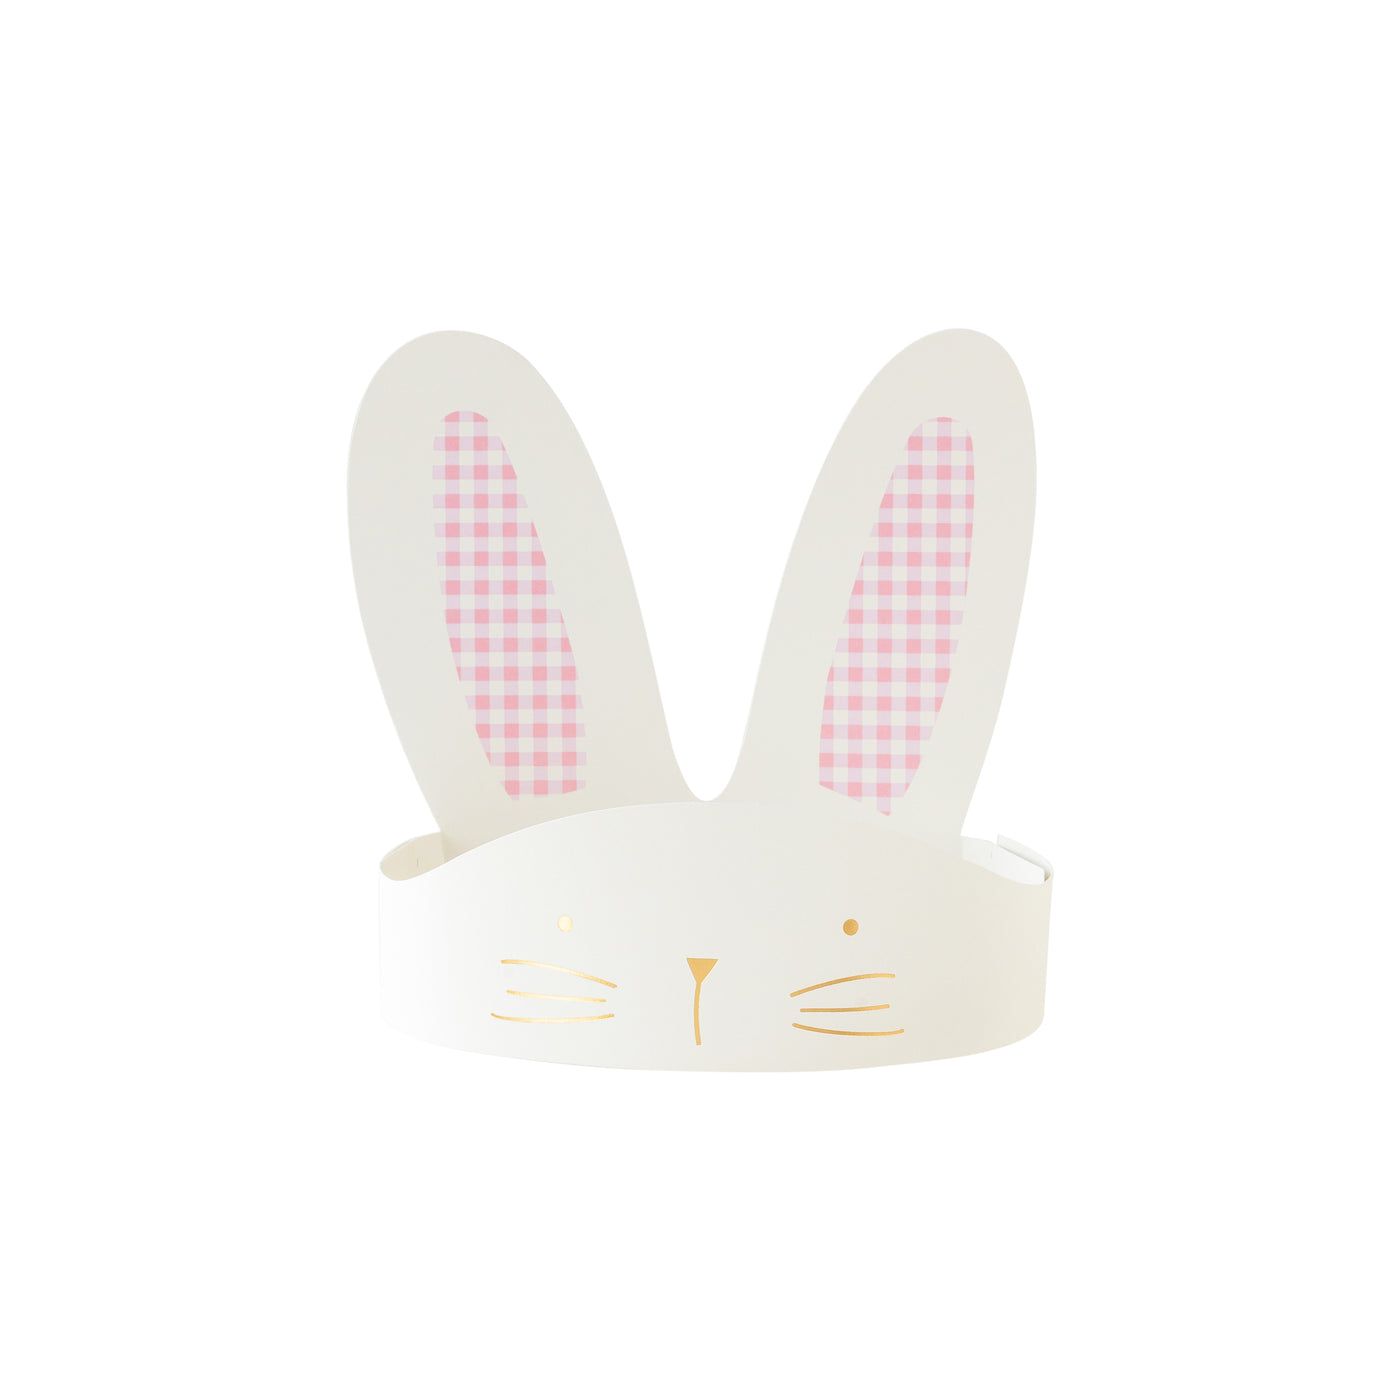 EAS908 - Easter Bunny Crowns